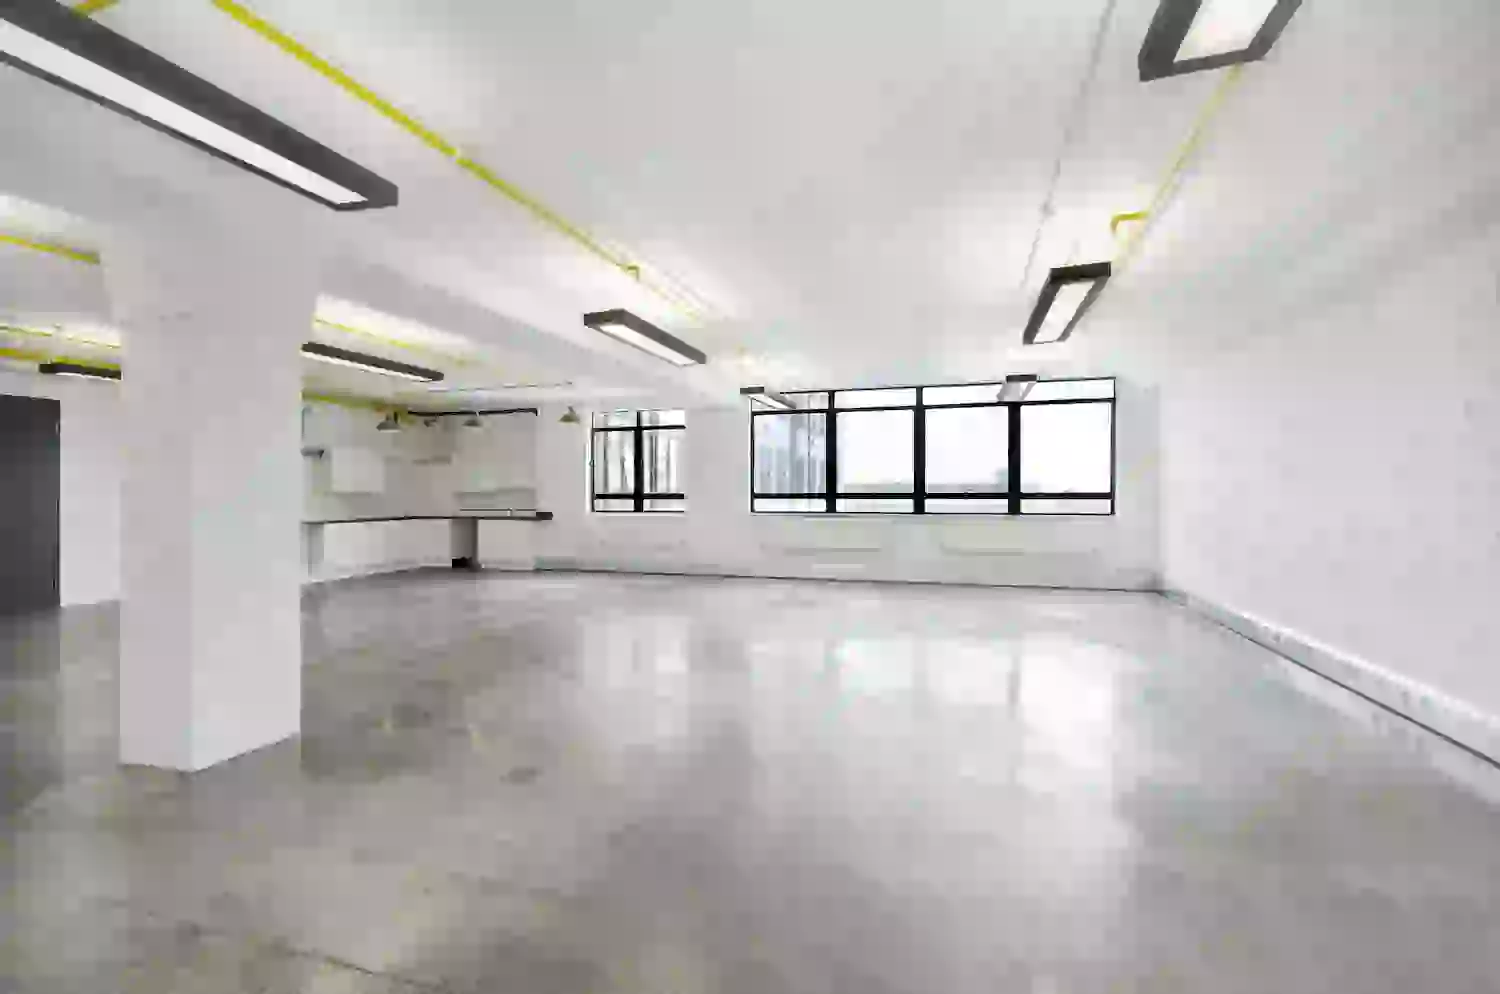 Office space to rent at The Biscuit Factory, Drummond Road, London, unit TB.J305, 1402 sq ft (130 sq m).